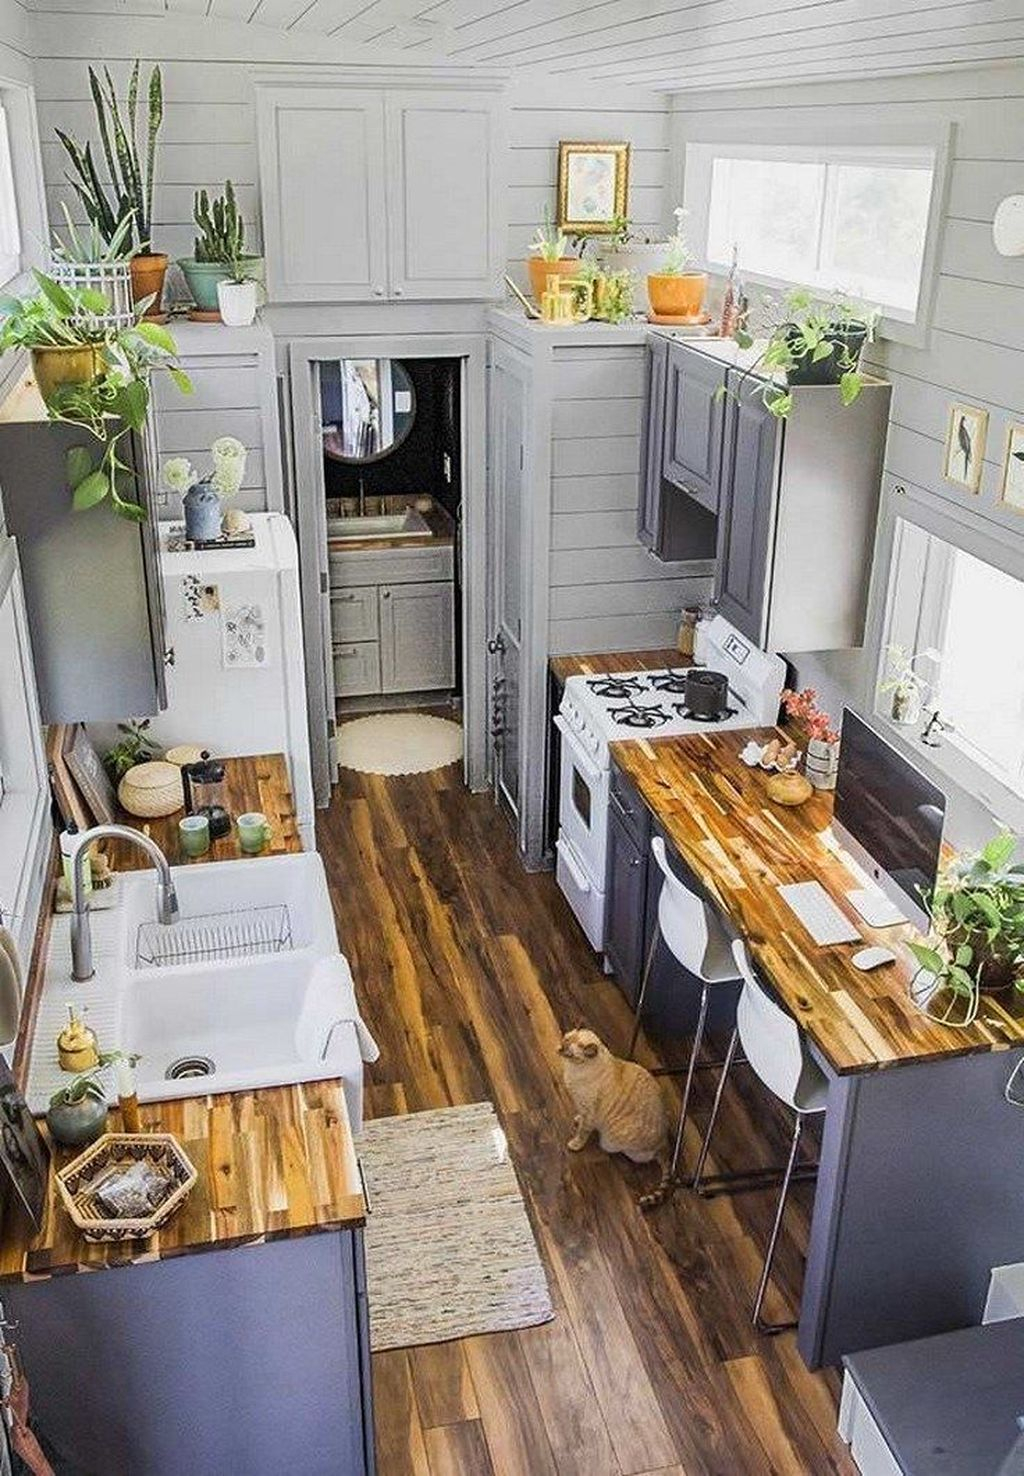 Enchanting Kitchen Design Ideas For Small Spaces39